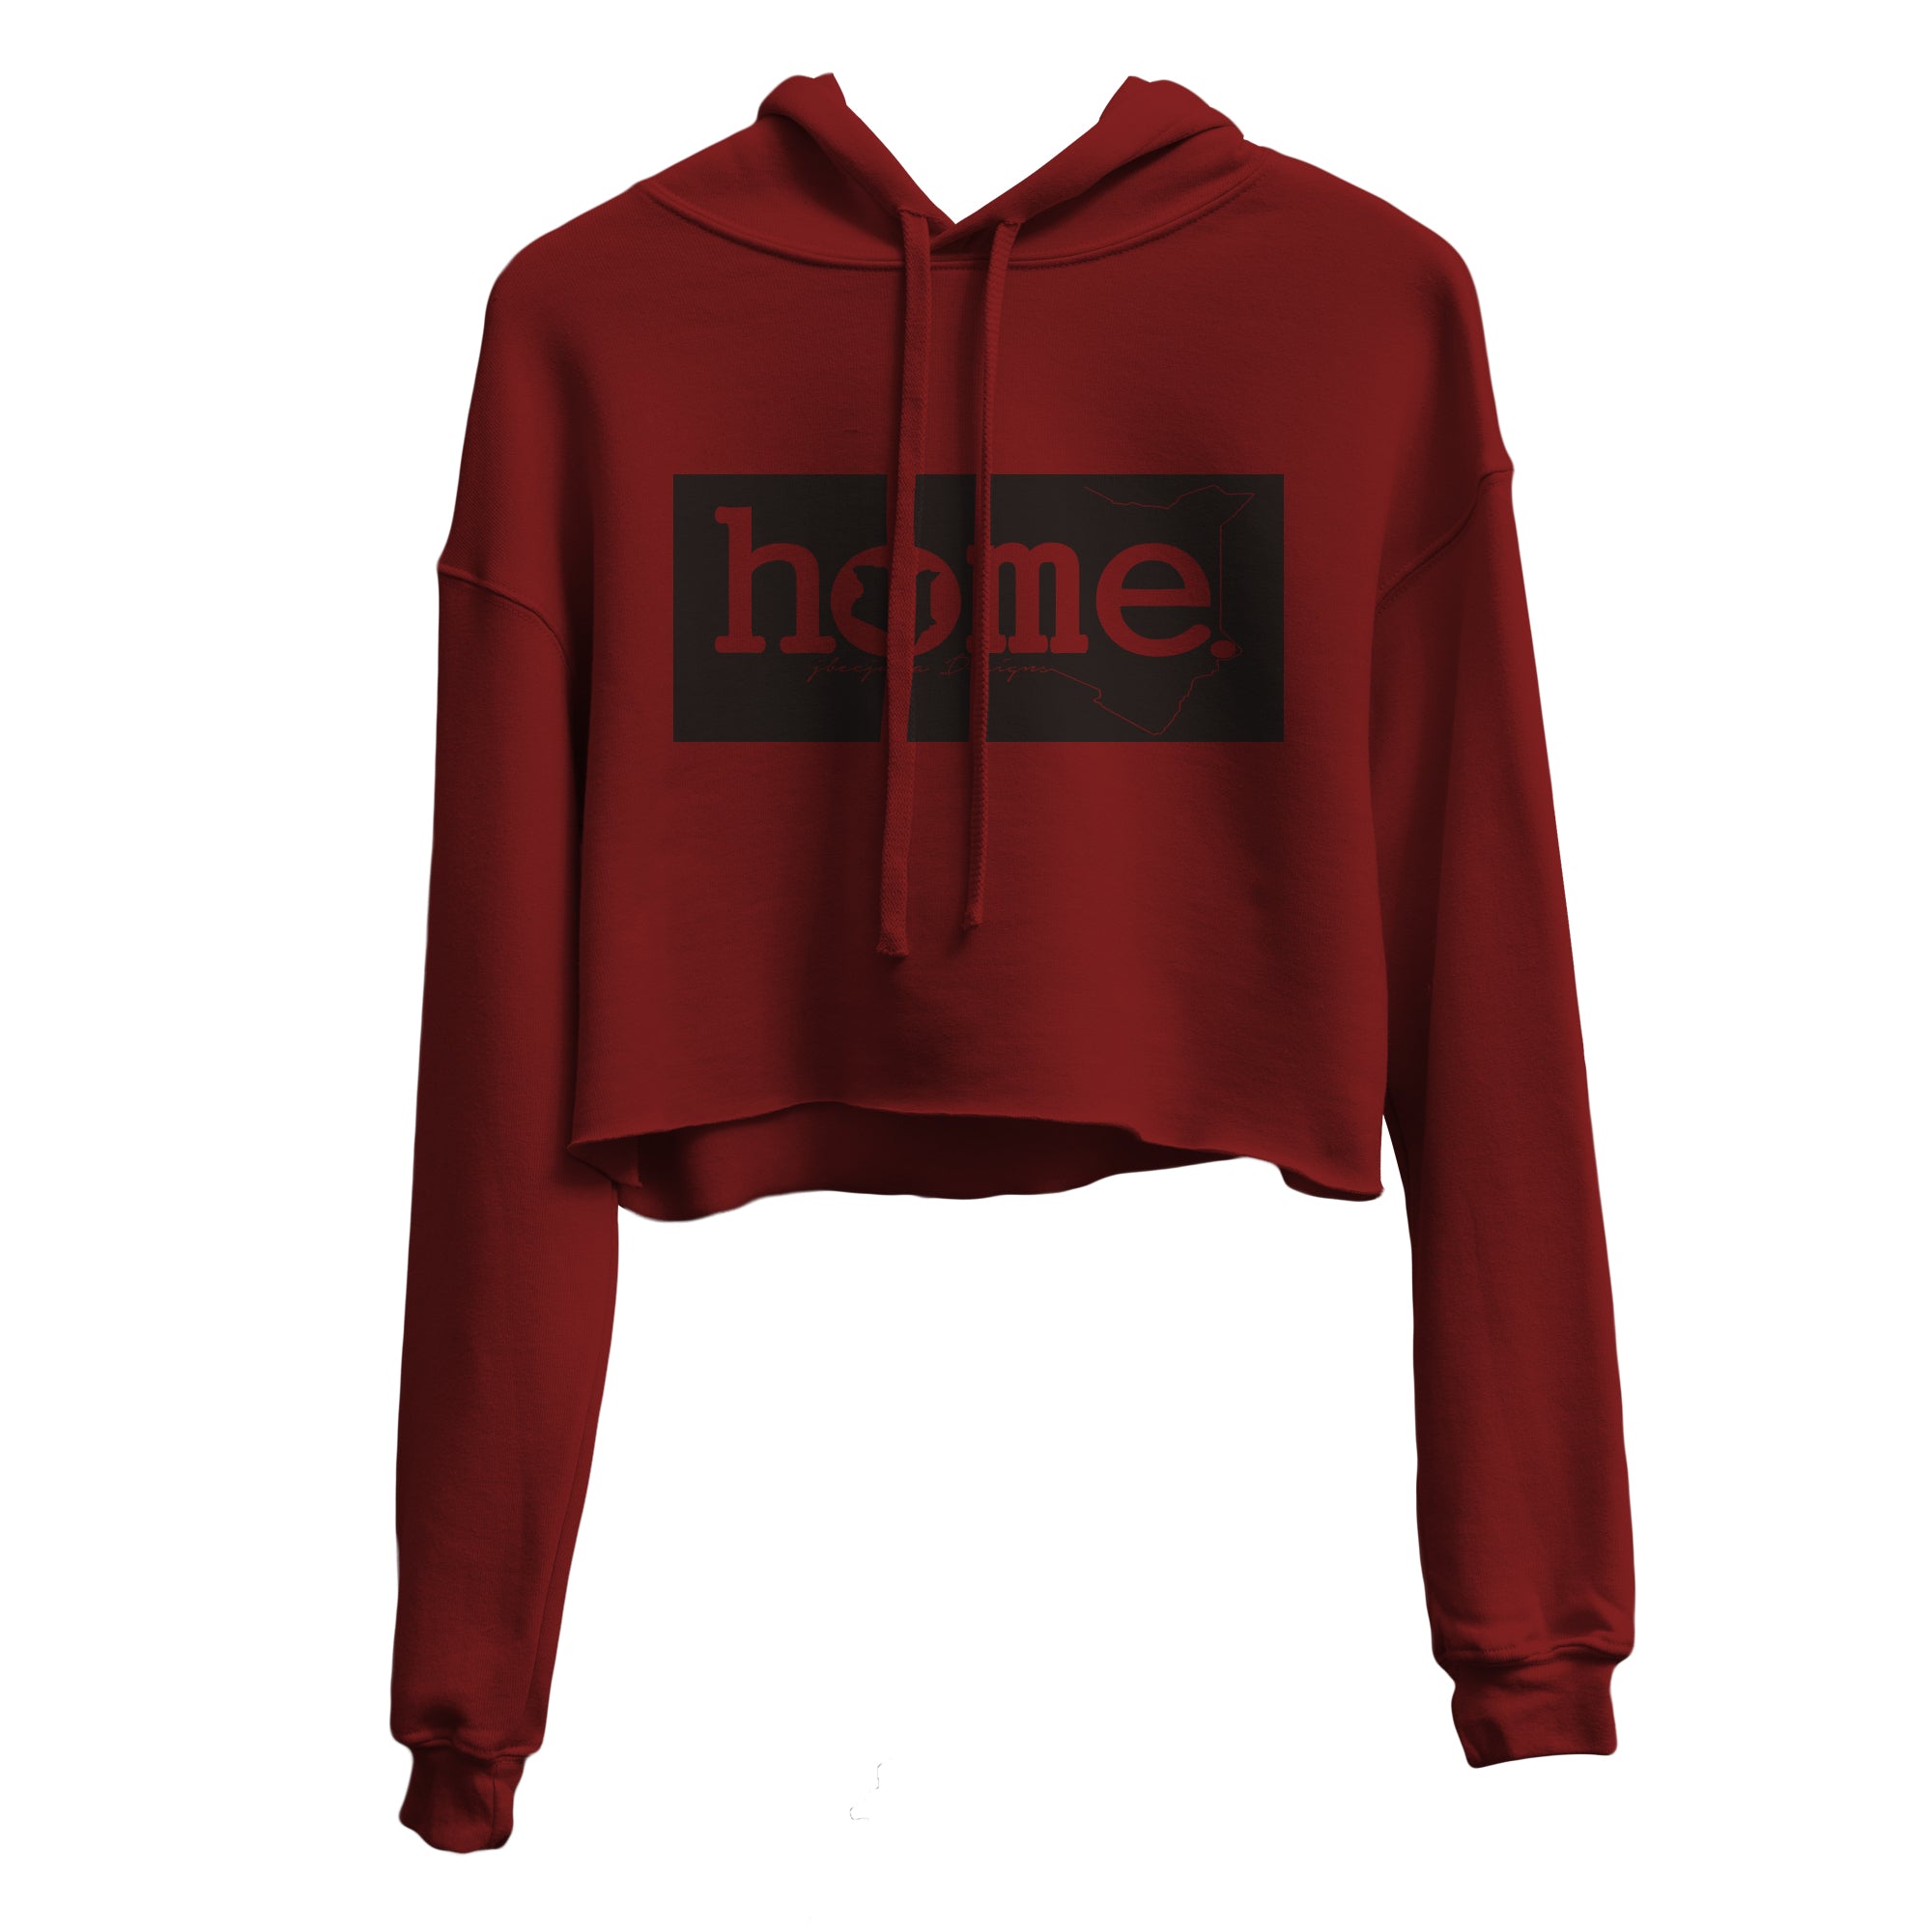 JBEEJURA DESINGZ | home_254 burgundy Cropped Hoodie (mid heavy fabric) with a black classiclogo